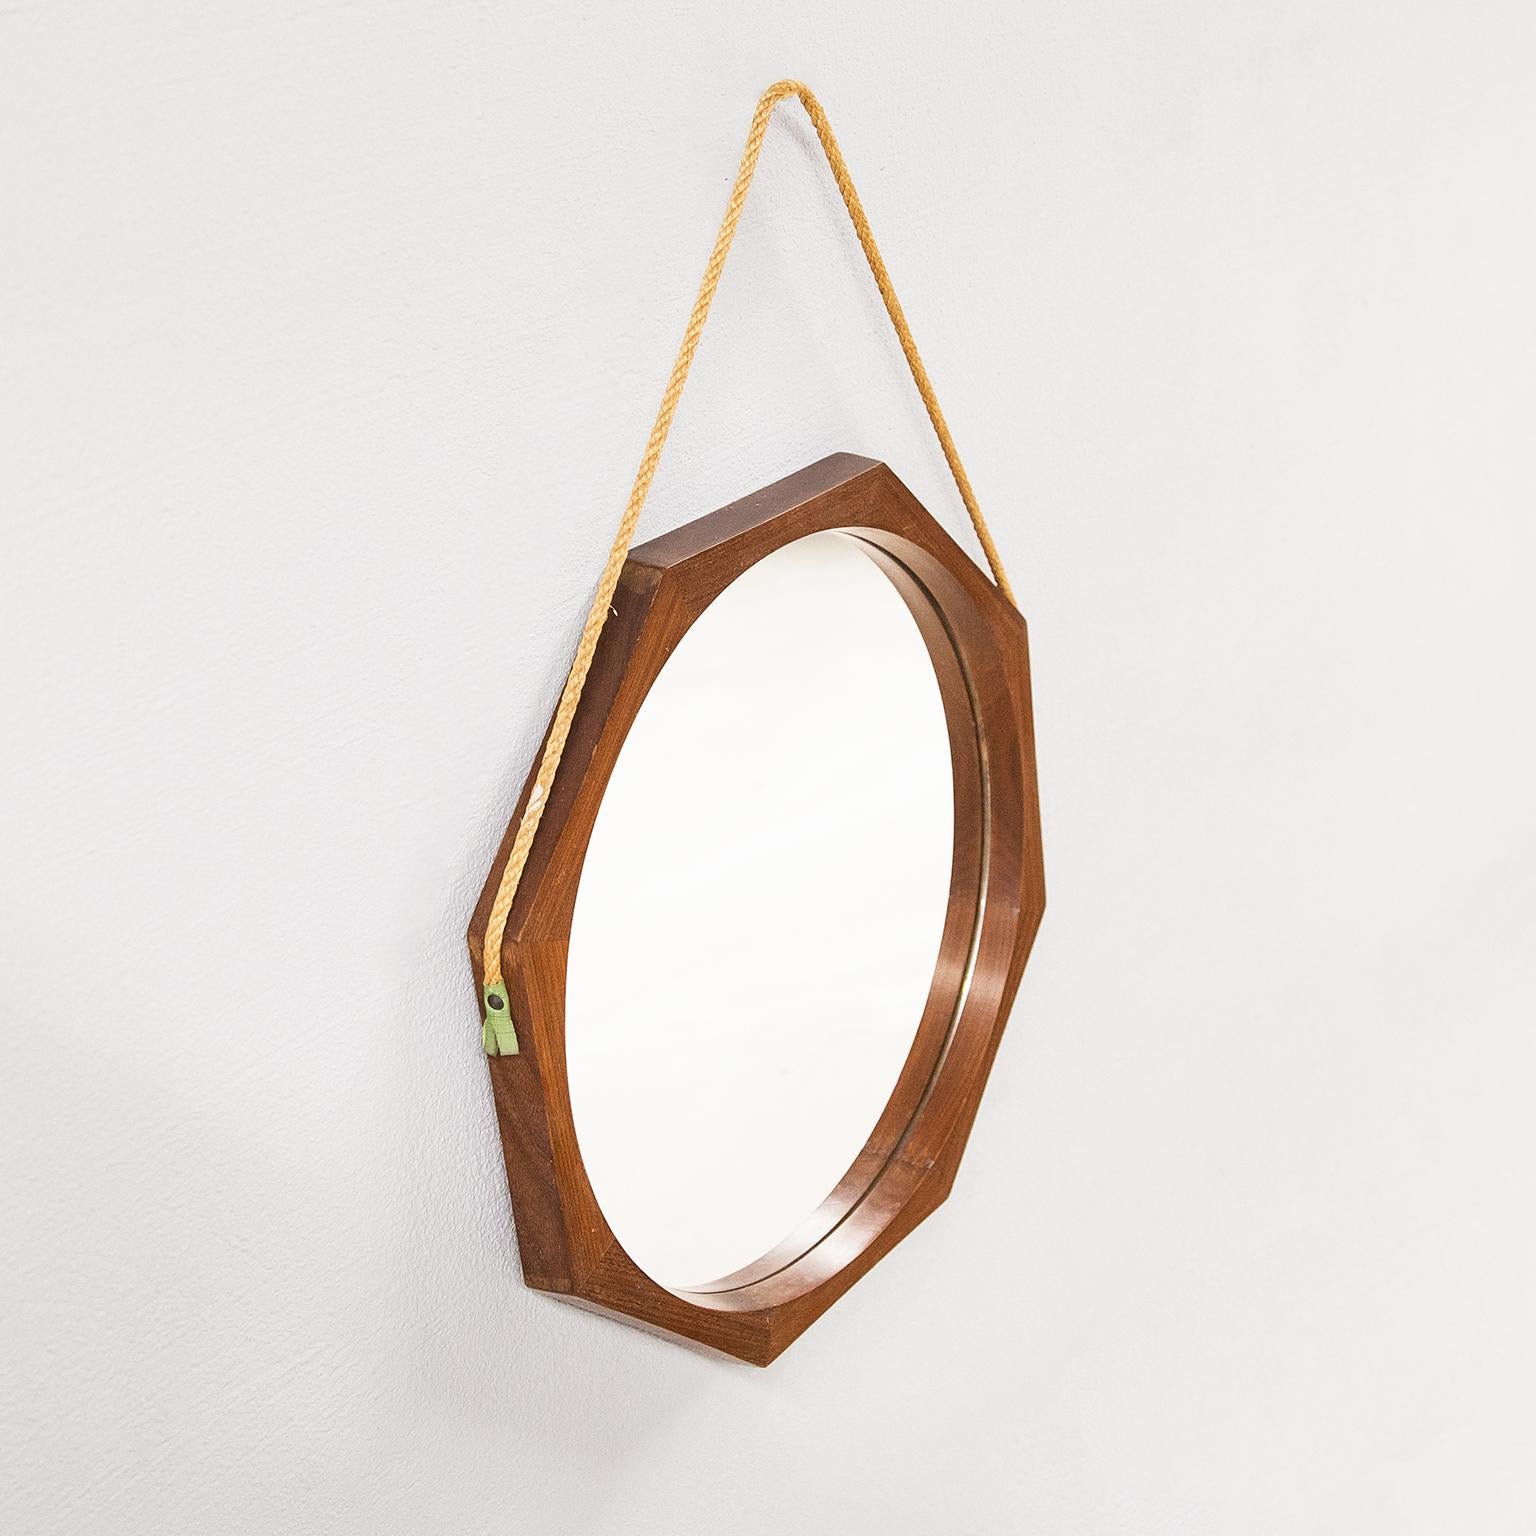 Octagonal mirror attributed to Campo and Carlo Graffi for Italian manufacturer HOME in the 1960s. Made of teak with an obvious interplay of joints where the skill and great craftsmanship on the cutting of the wood is denoted .
What makes it even